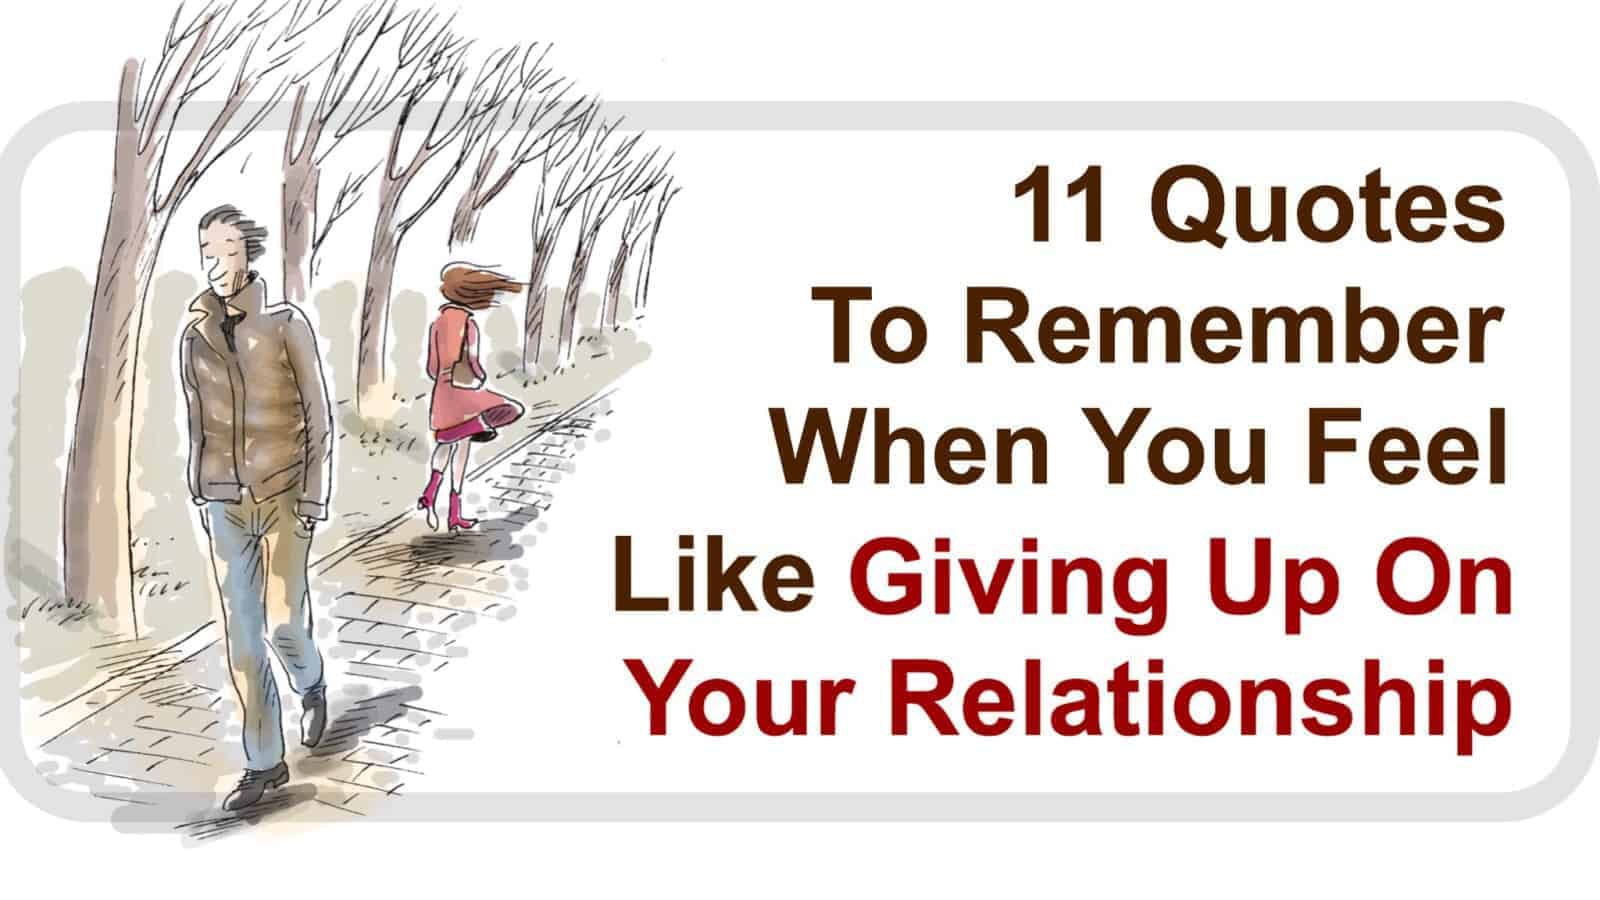 11 Quotes to Remember When You Feel Like Giving Up On Your Relationship